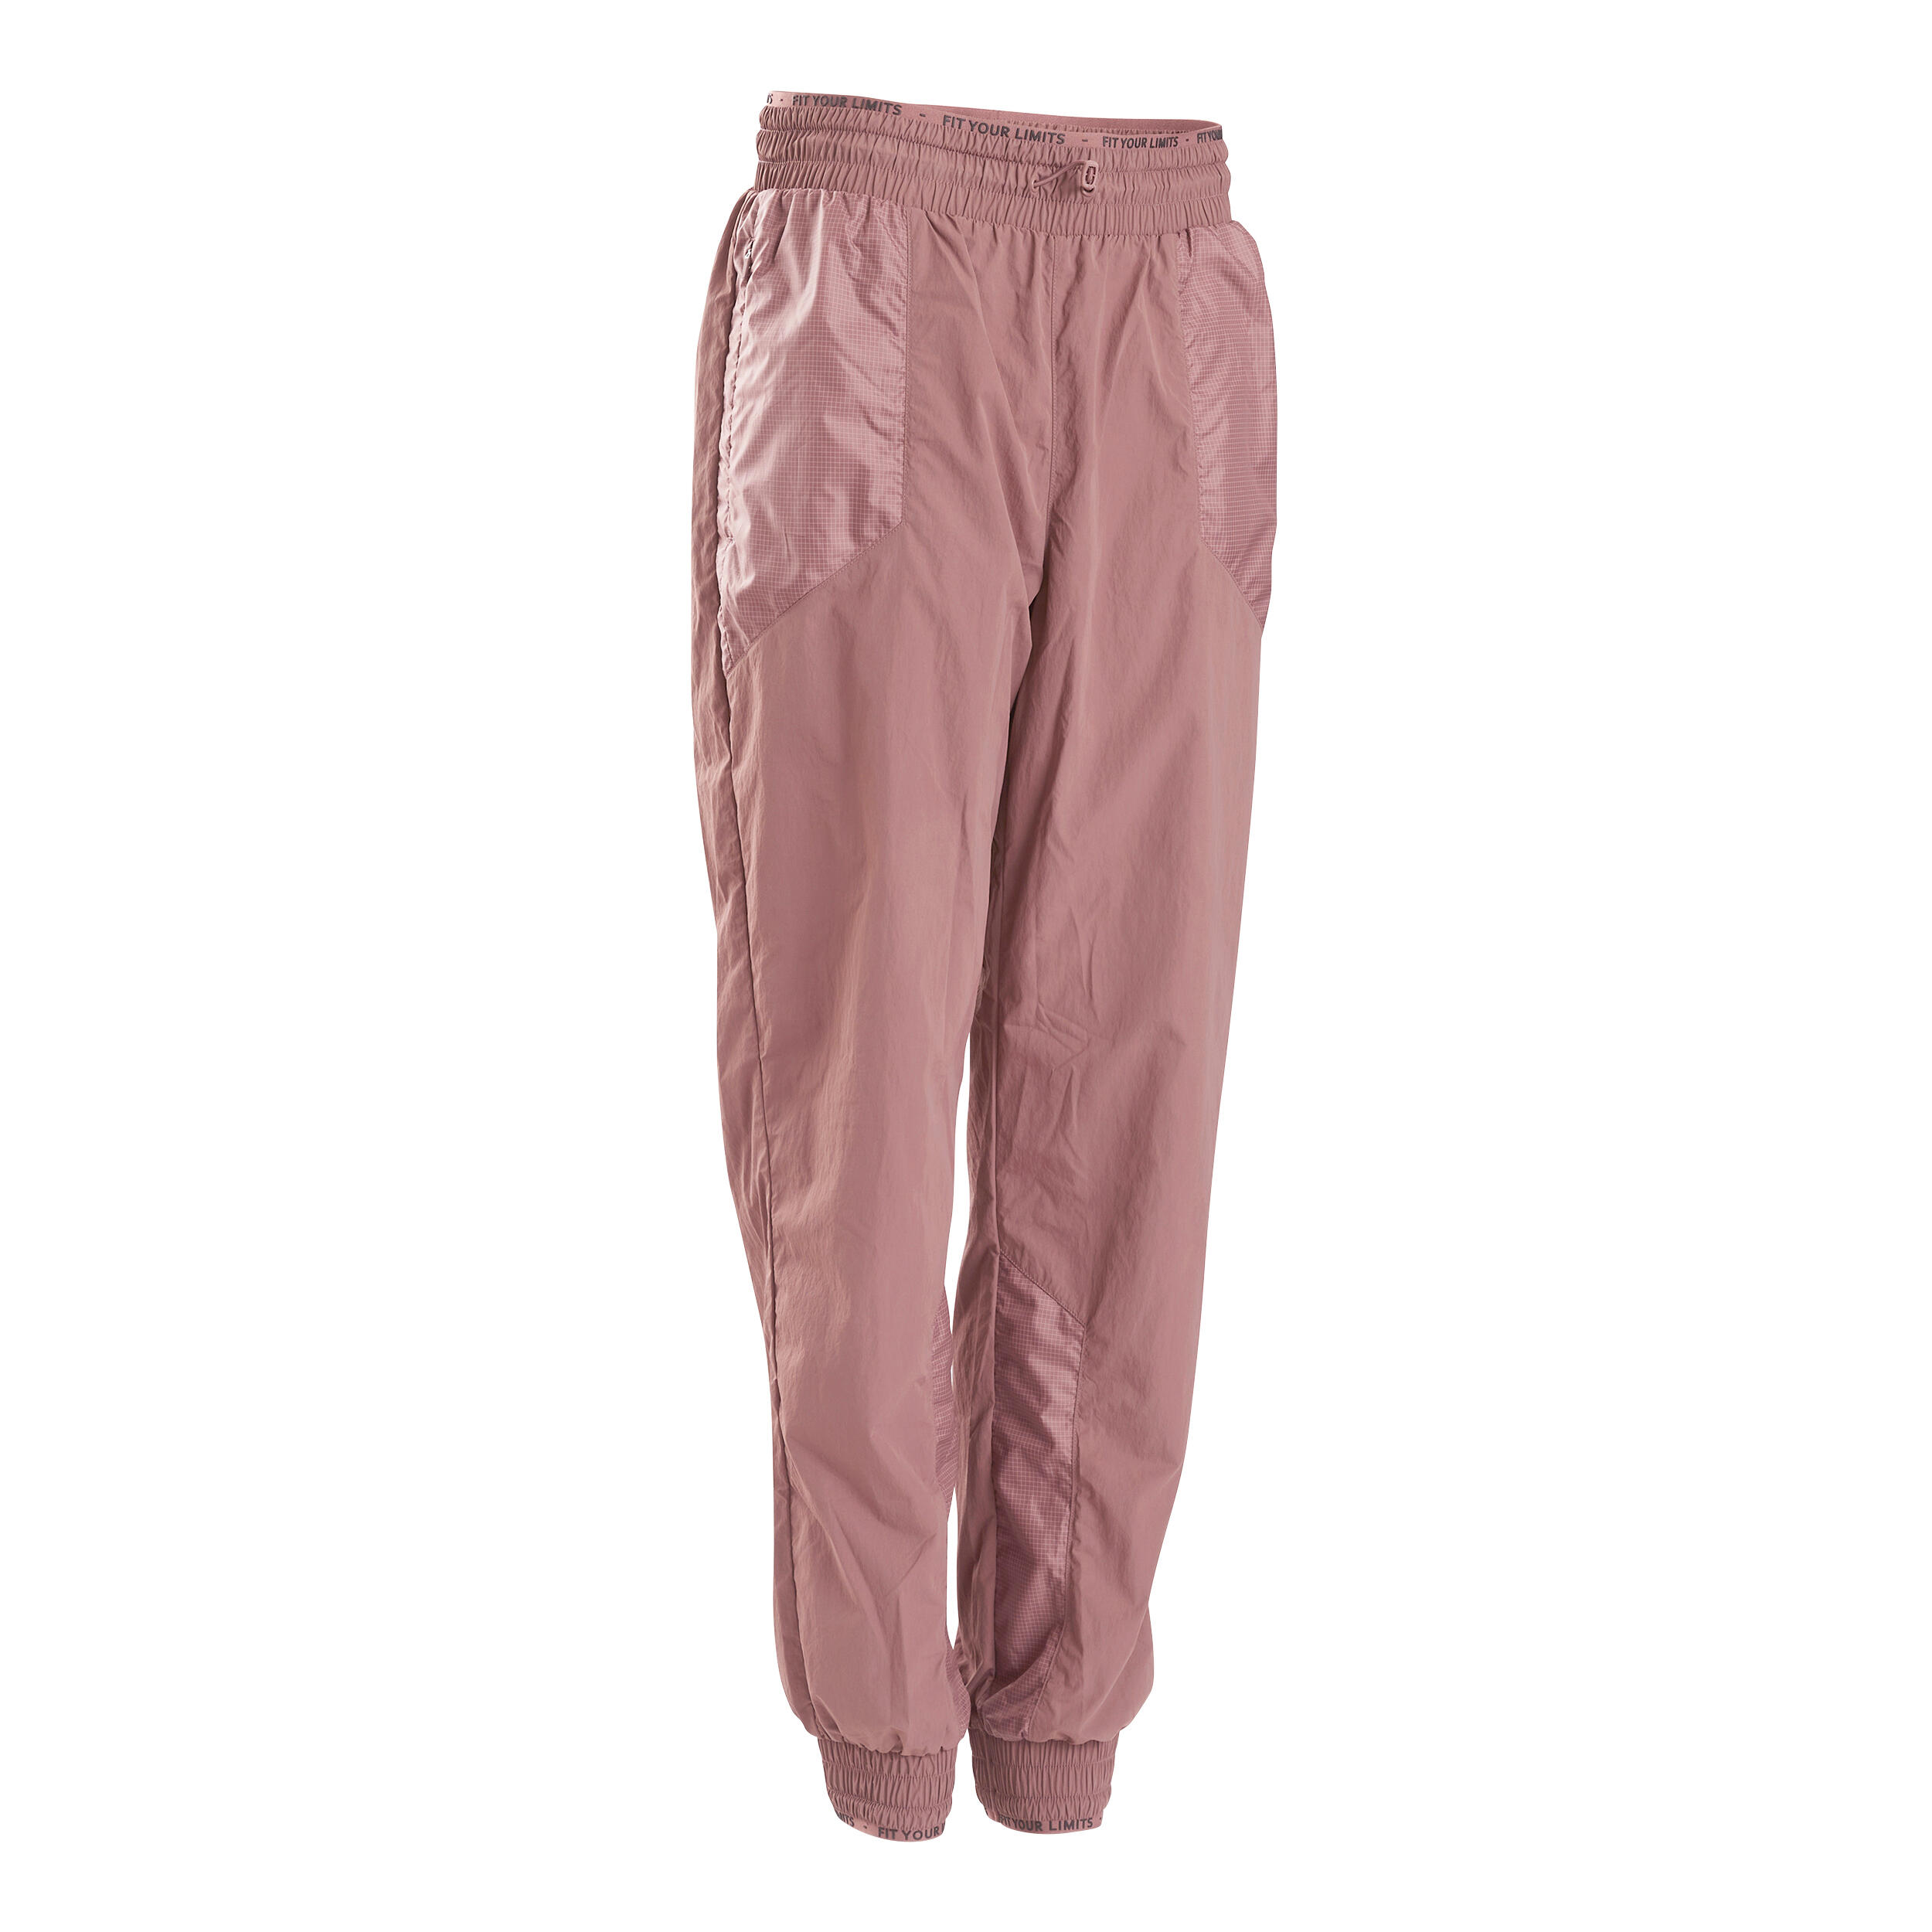 9400 Track Pants Stock Photos Pictures  RoyaltyFree Images  iStock   Mens track pants Man in track pants